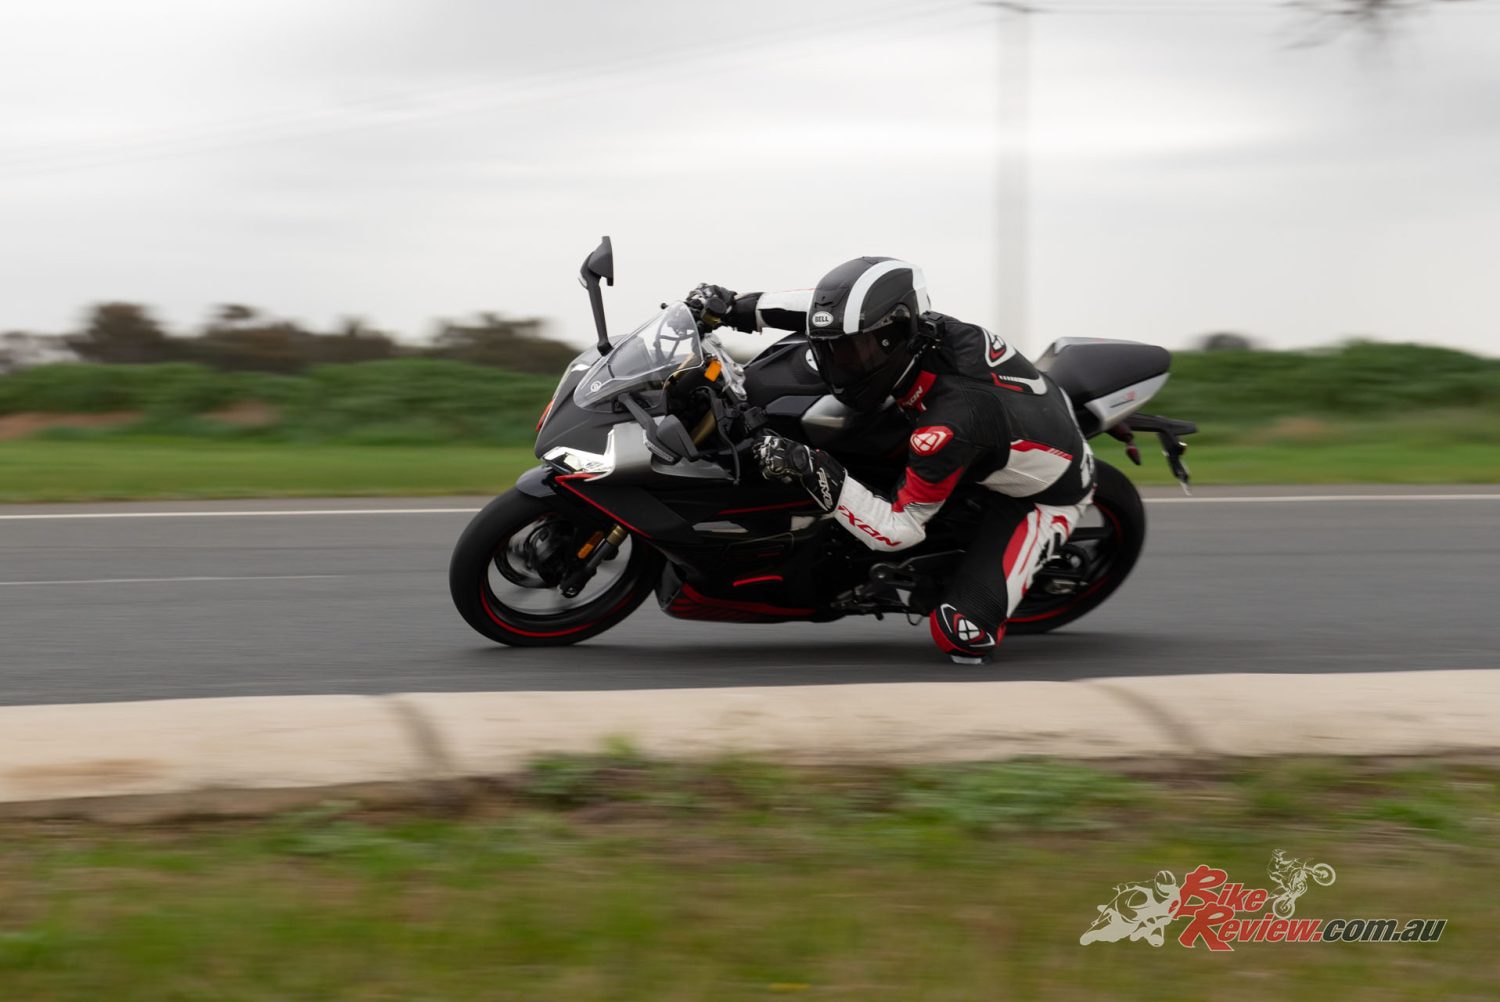 "On a flowing circuit like the Albury/Wodonga one, the 450SR can pretty much just stay in one gear as you connect the corners smoothly and really rev the machine out to redline."